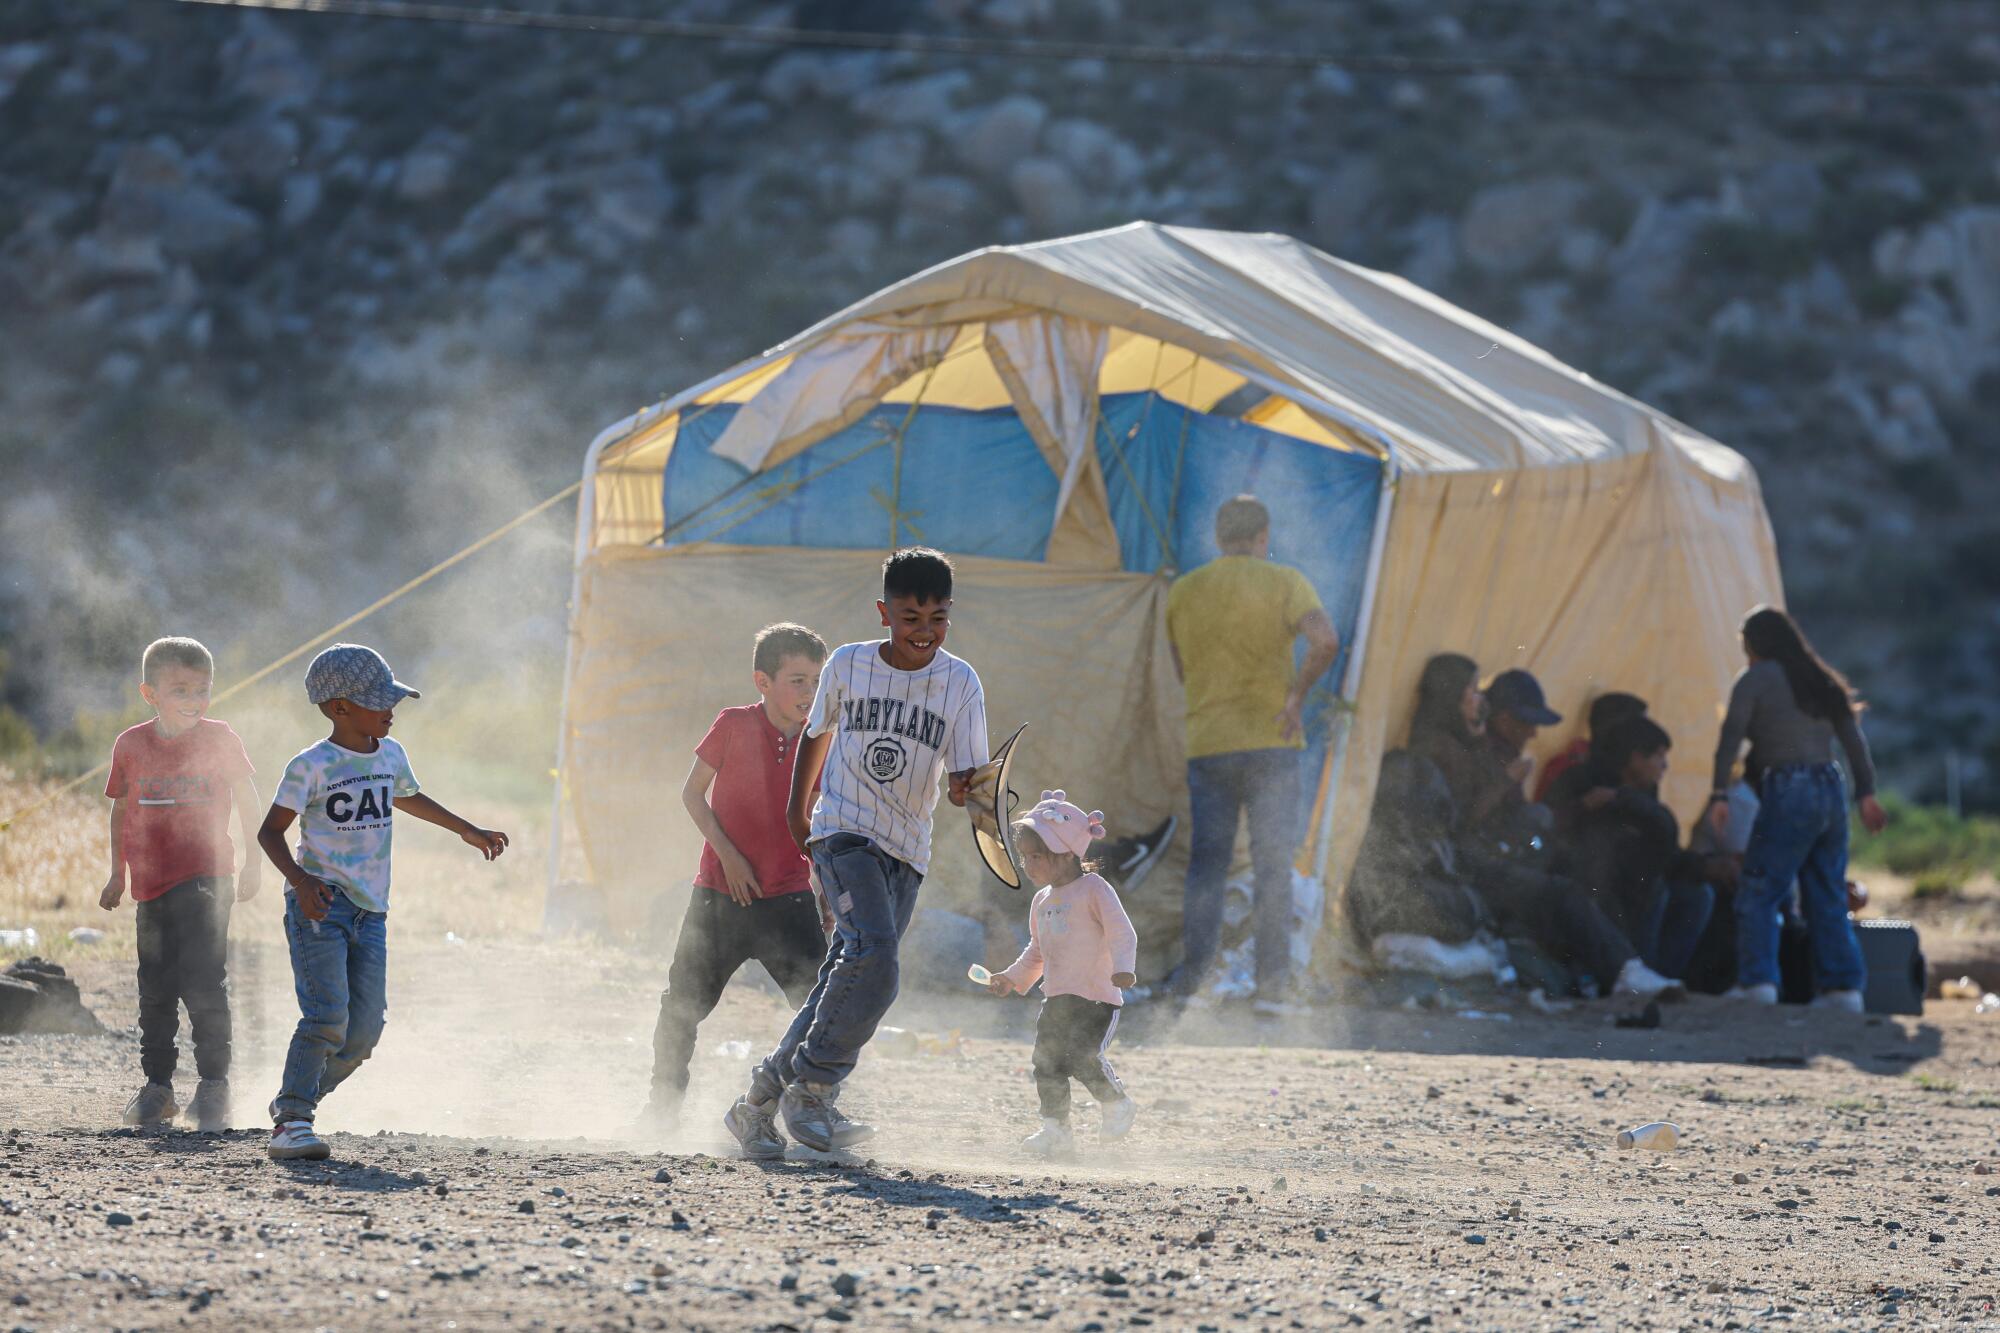 Children play soccer in the dirt with a tent in the background. 